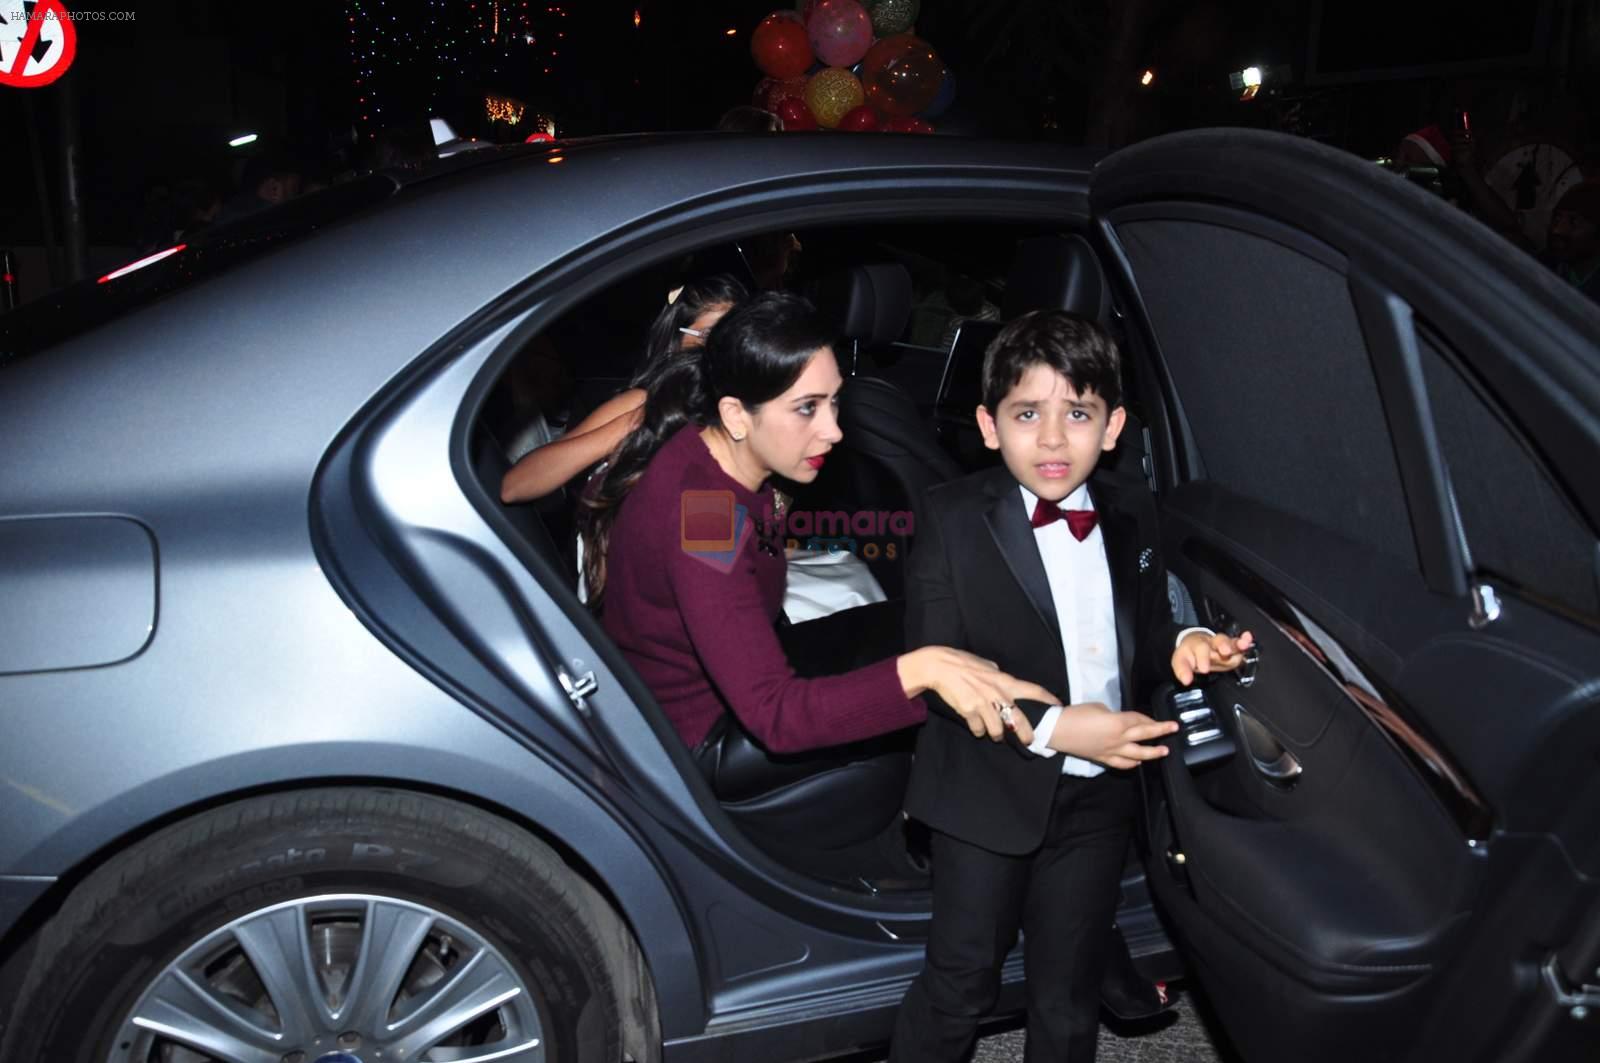 Karisma Kapoor Visit St. Marry Church For Christmas Eve on 25th Dec 2015